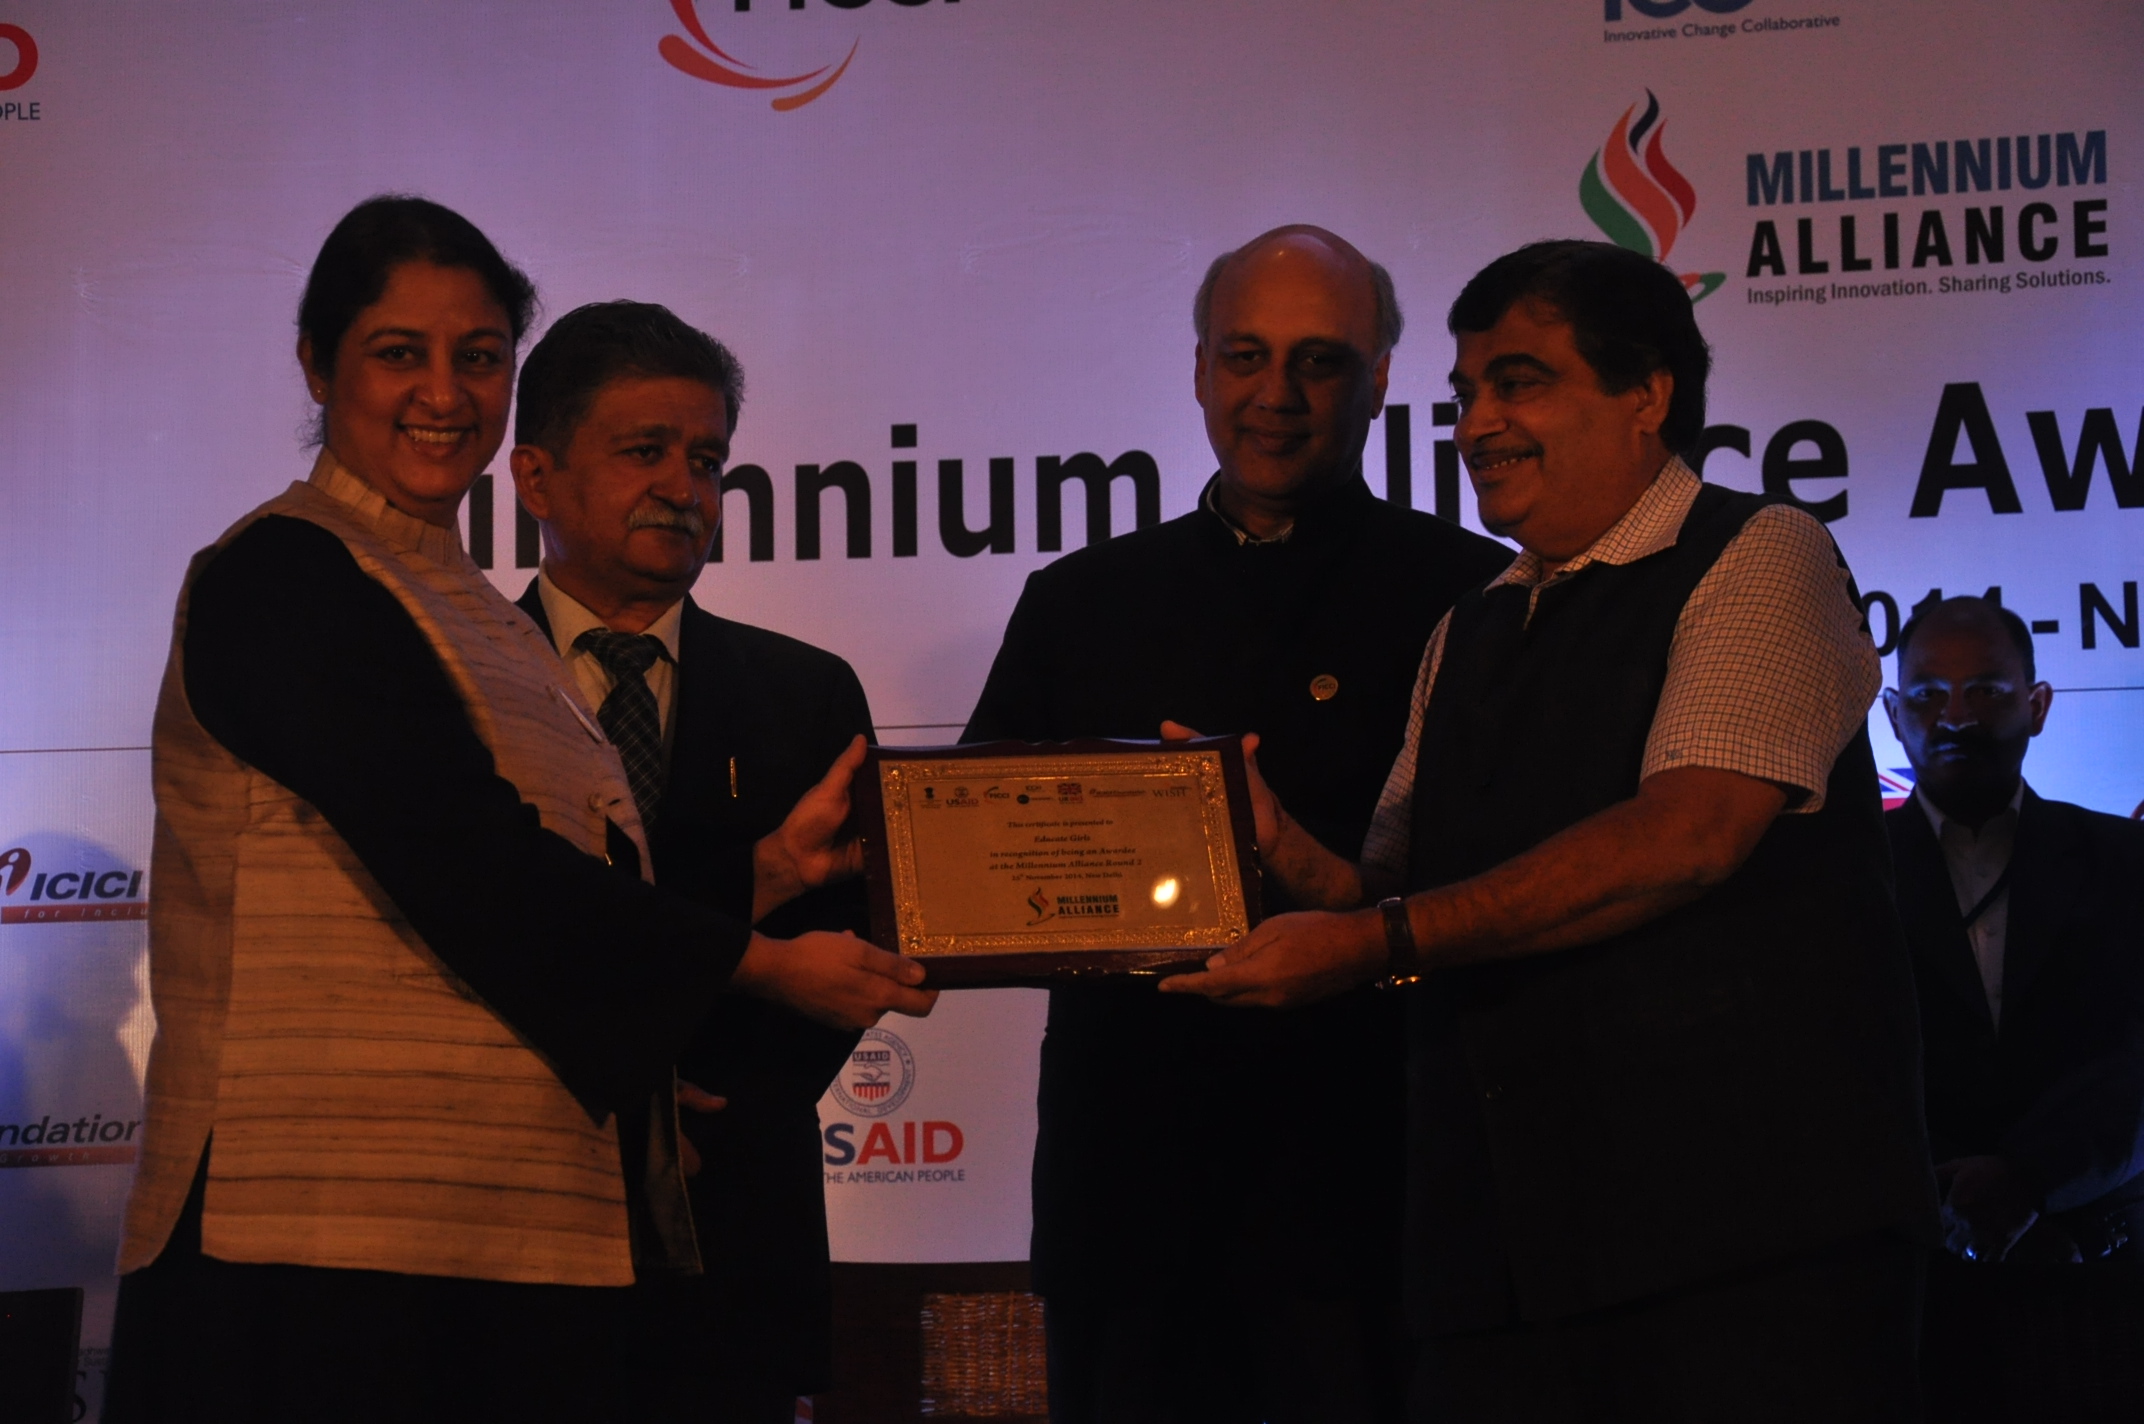 Safeena Husain, Executive Director & Founder of Educate Girls, receives the Millennium Alliance Award from Nitin Gadkari, Union Minister of the Ministry of Road Transport & Highways and Shipping, Govt. of India